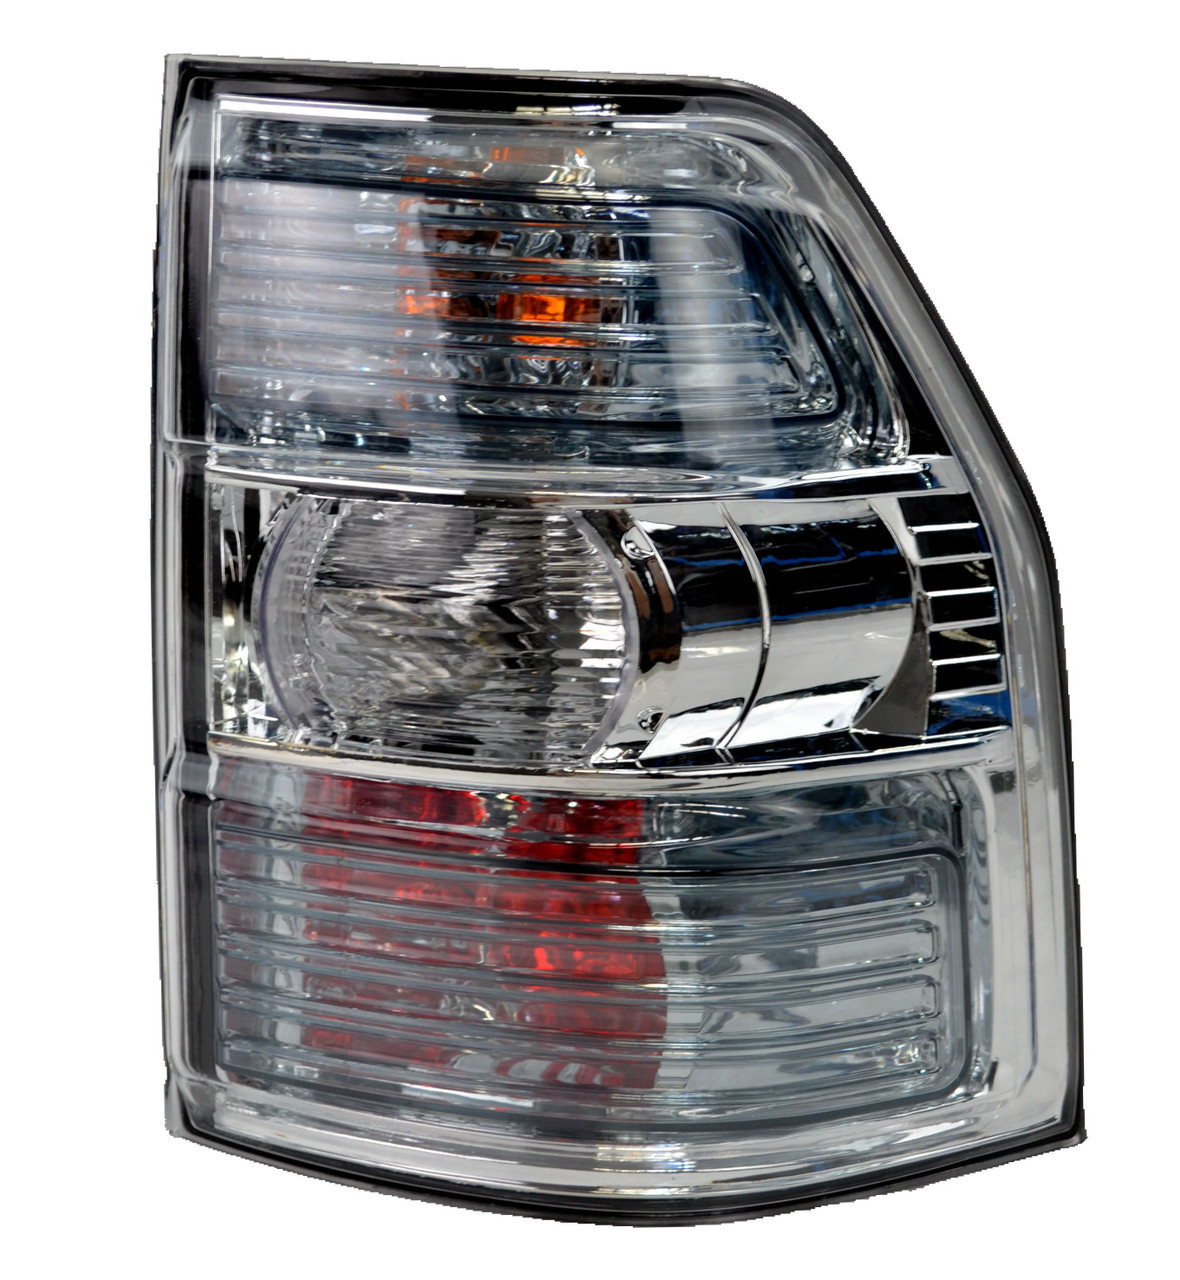 Tail light for Mitsubishi Pajero NS/NT/NW 11/06-06/14 New Right Rear Lamp 11 12 13